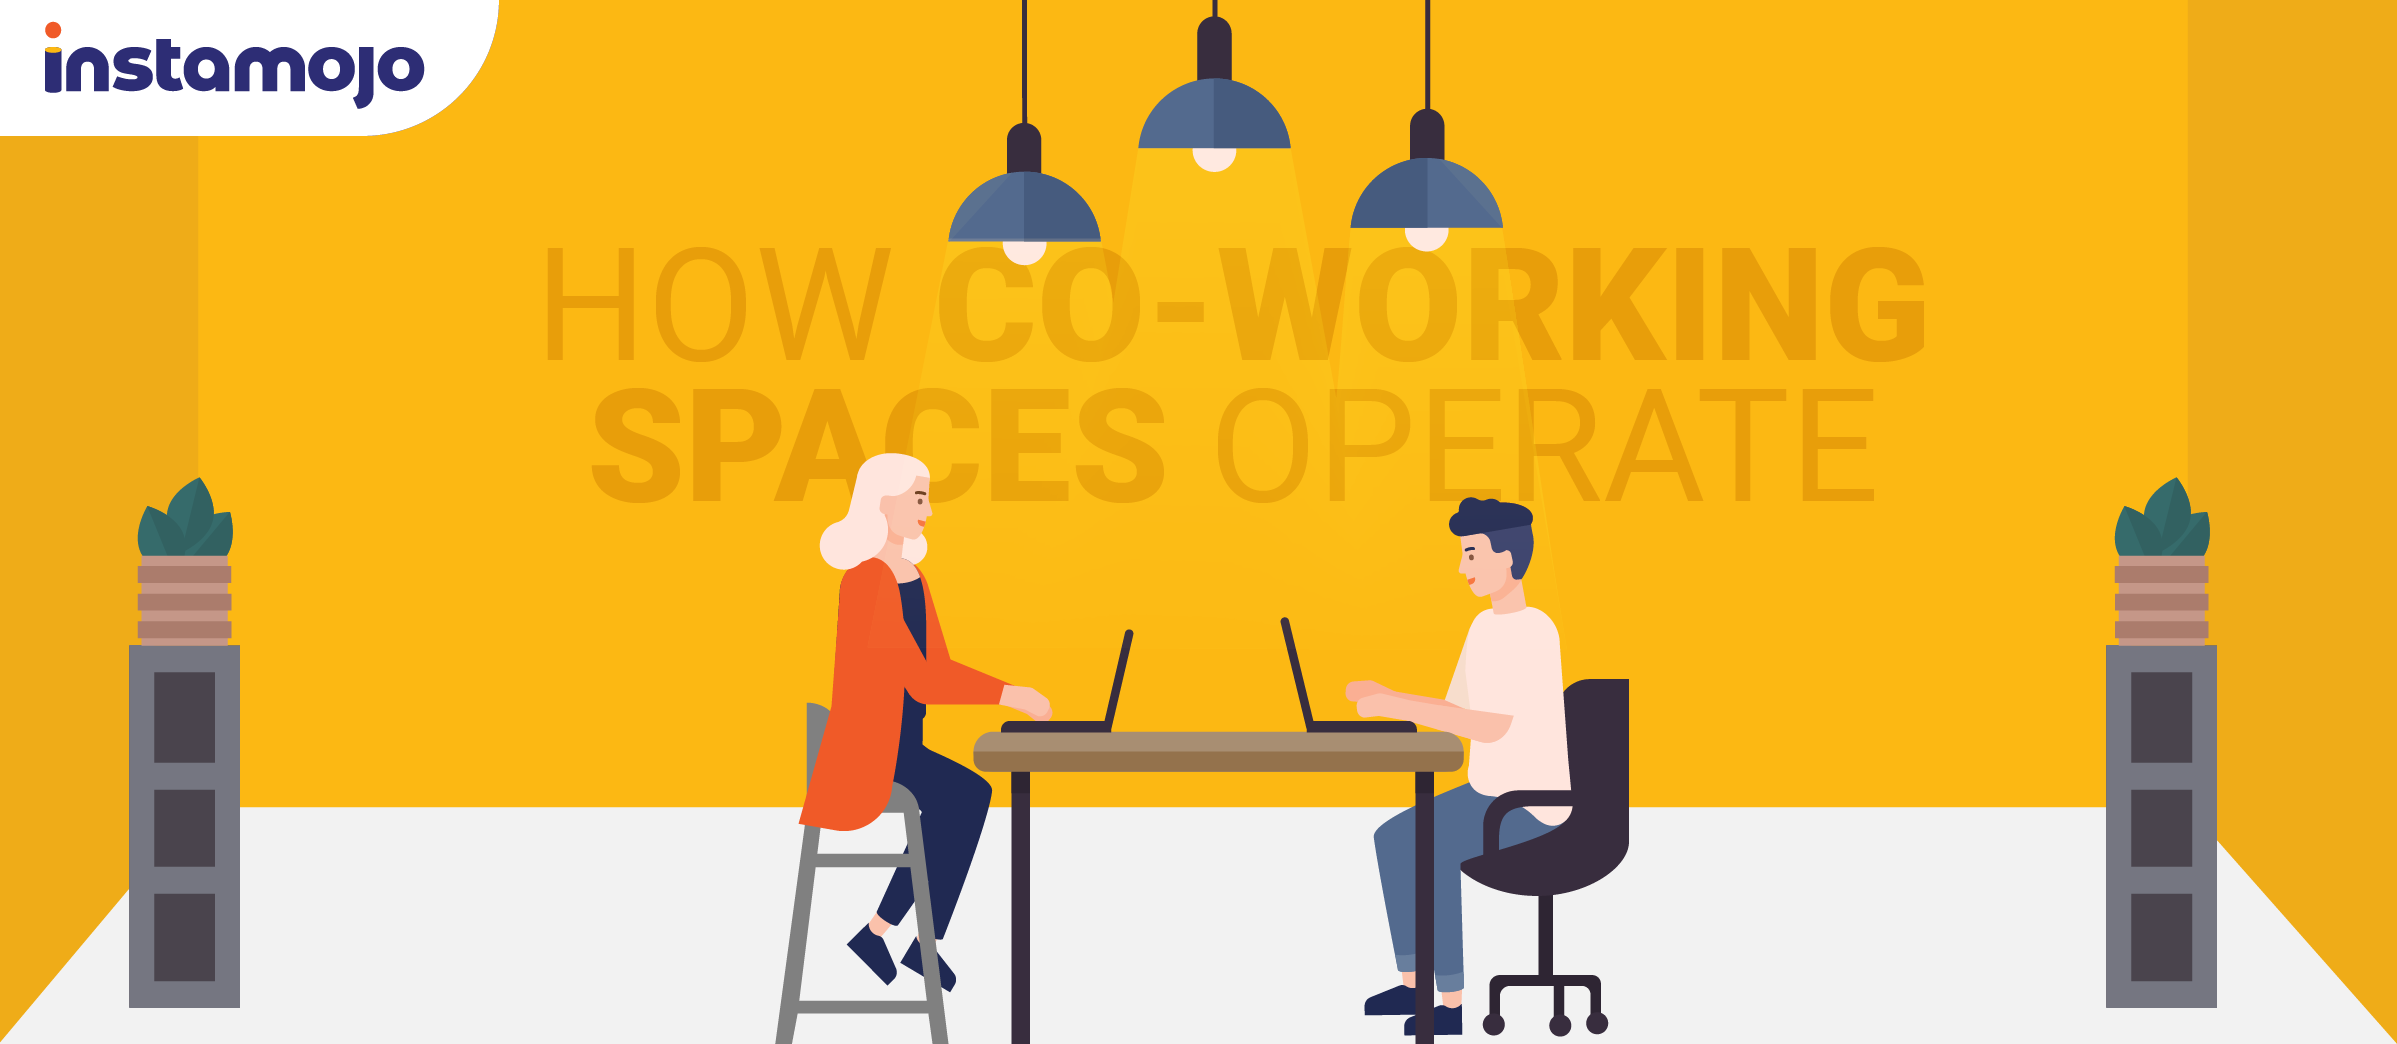 How co-working spaces operate